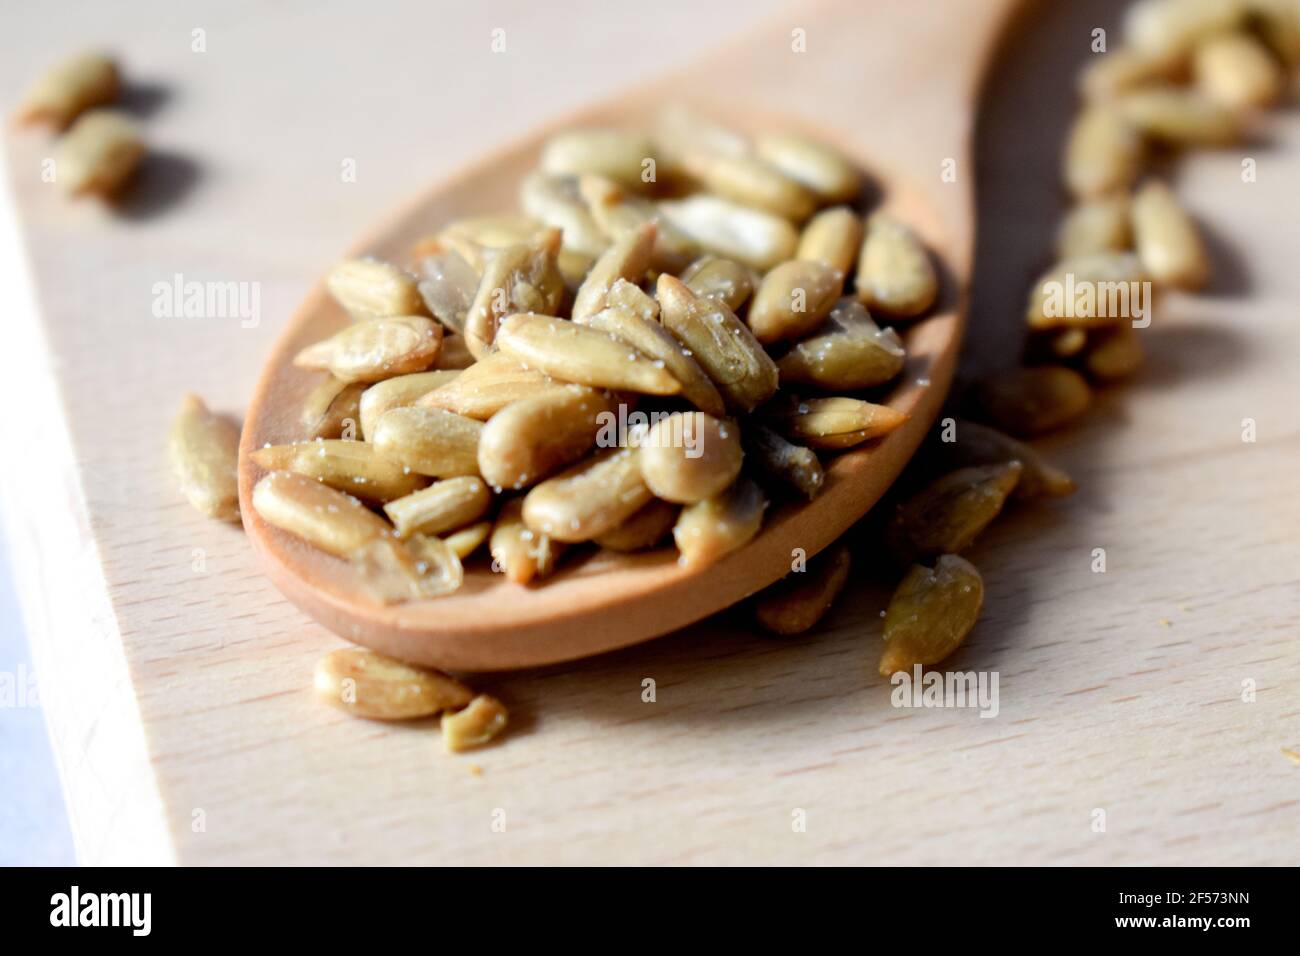 Sunflower seeds in a wooden spoon Stock Photo